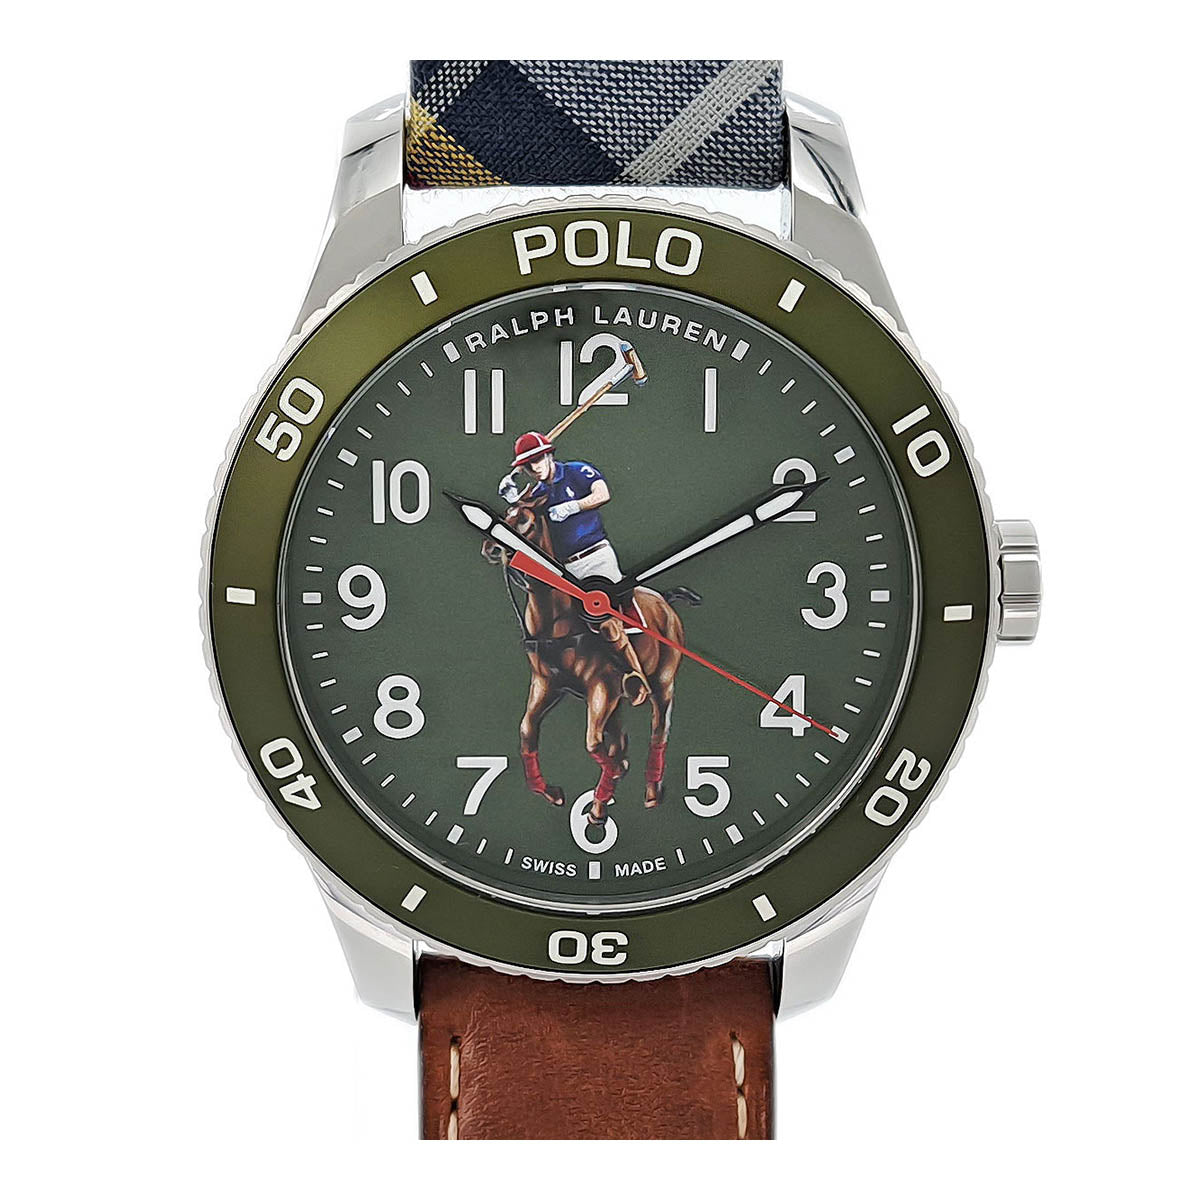 Ralph Lauren Polo Player 472836826003 Men's Automatic Stainless Steel Wristwatch [Pre-Owned] 4.72836826003E11